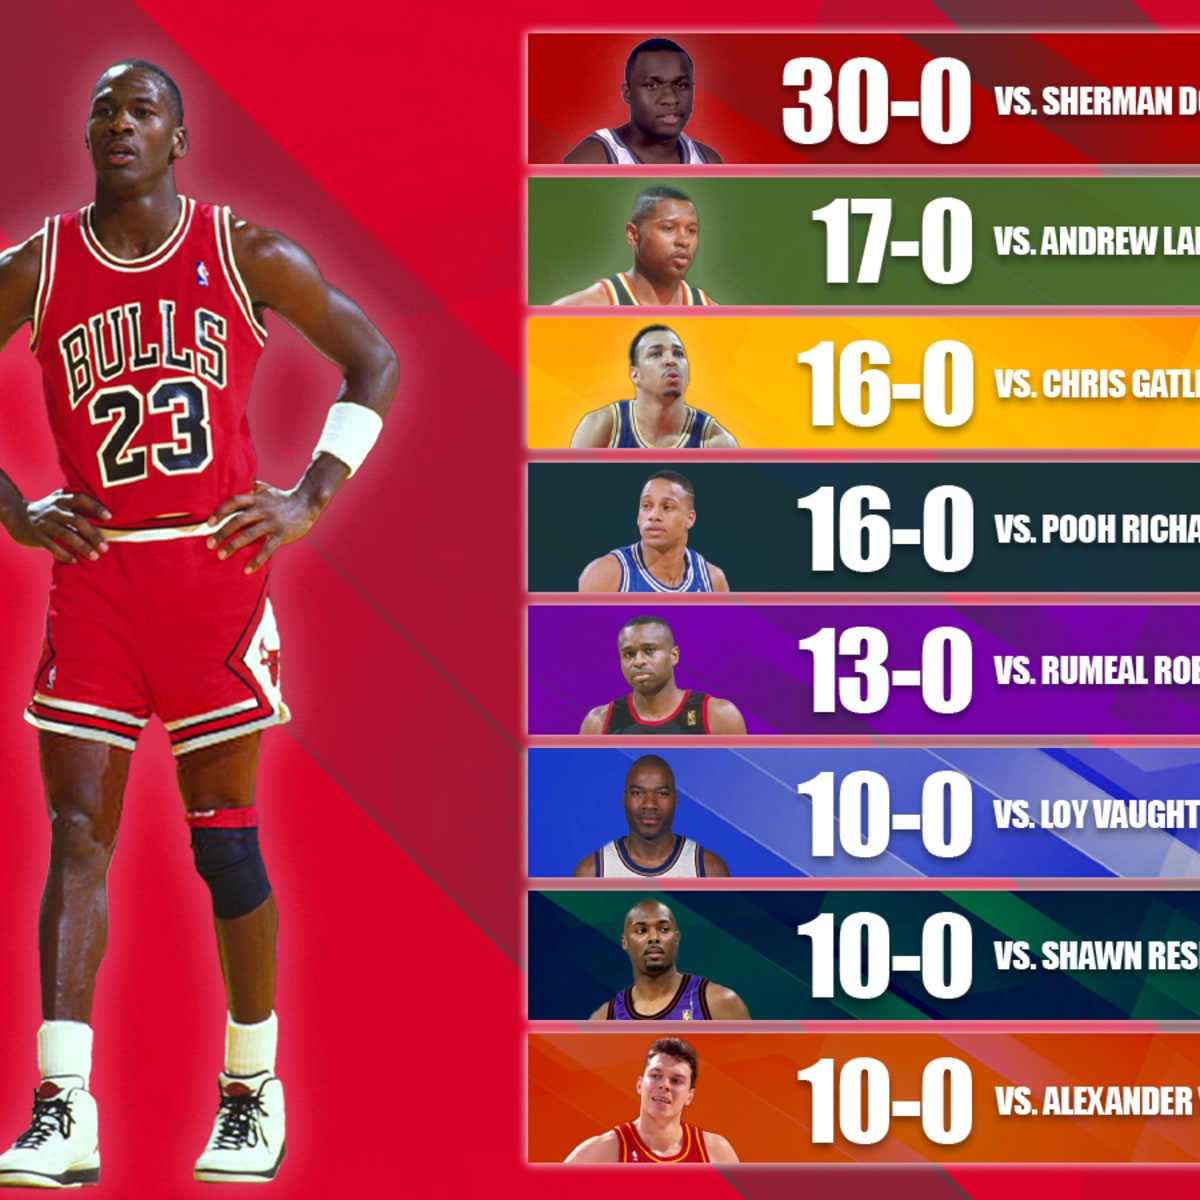 The Jordan Rules on X: 1991 #NBAFinals Chicago Bulls vs Los Angeles Lakers  Michael Jordan averaged 31.2 points on 56% shooting, 11.4 assists, 6.6  rebounds, 2.8 steals, and 1.4 blocks en route